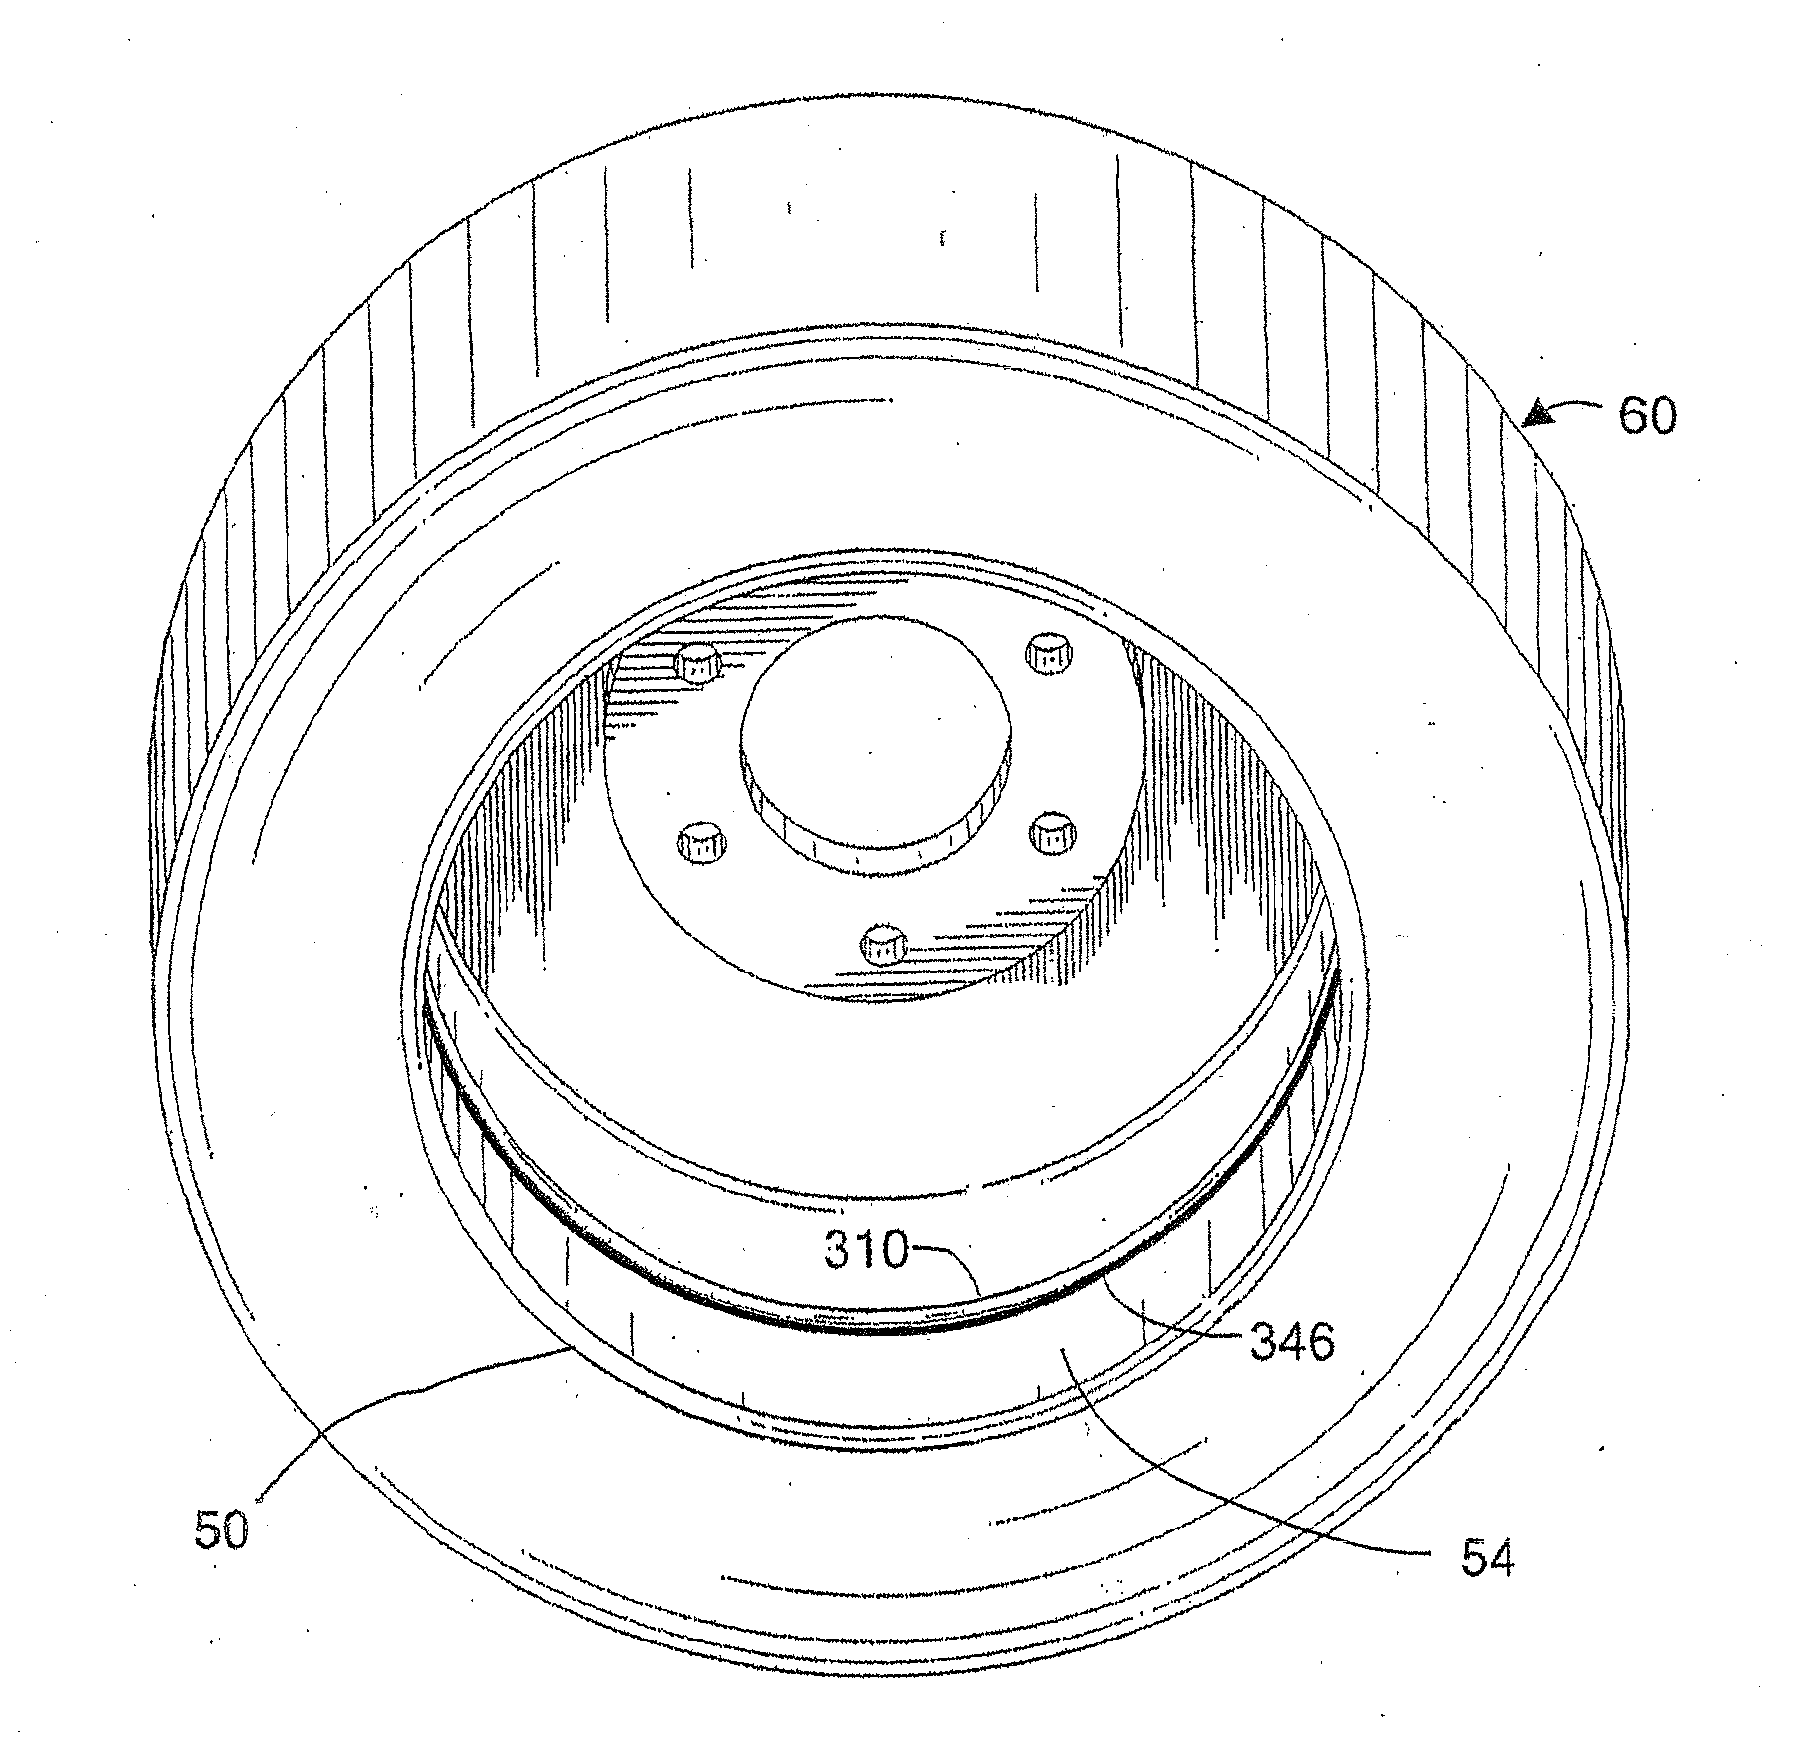 Uniformity and stabilizing system for a tire/wheel assembly